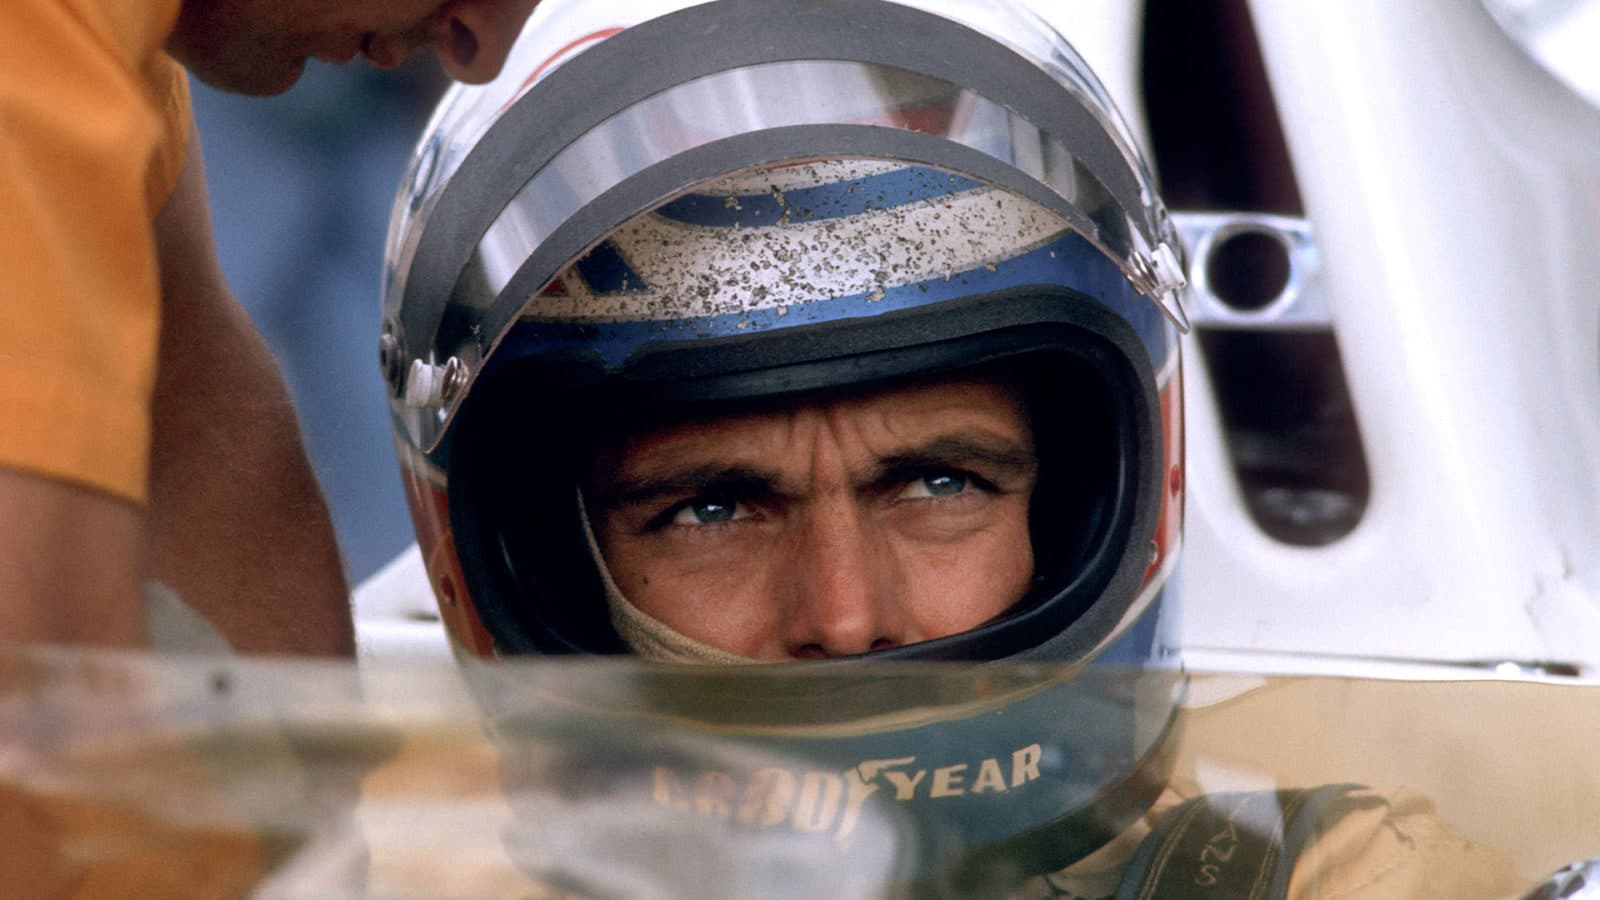 Peter Revson with helmet on